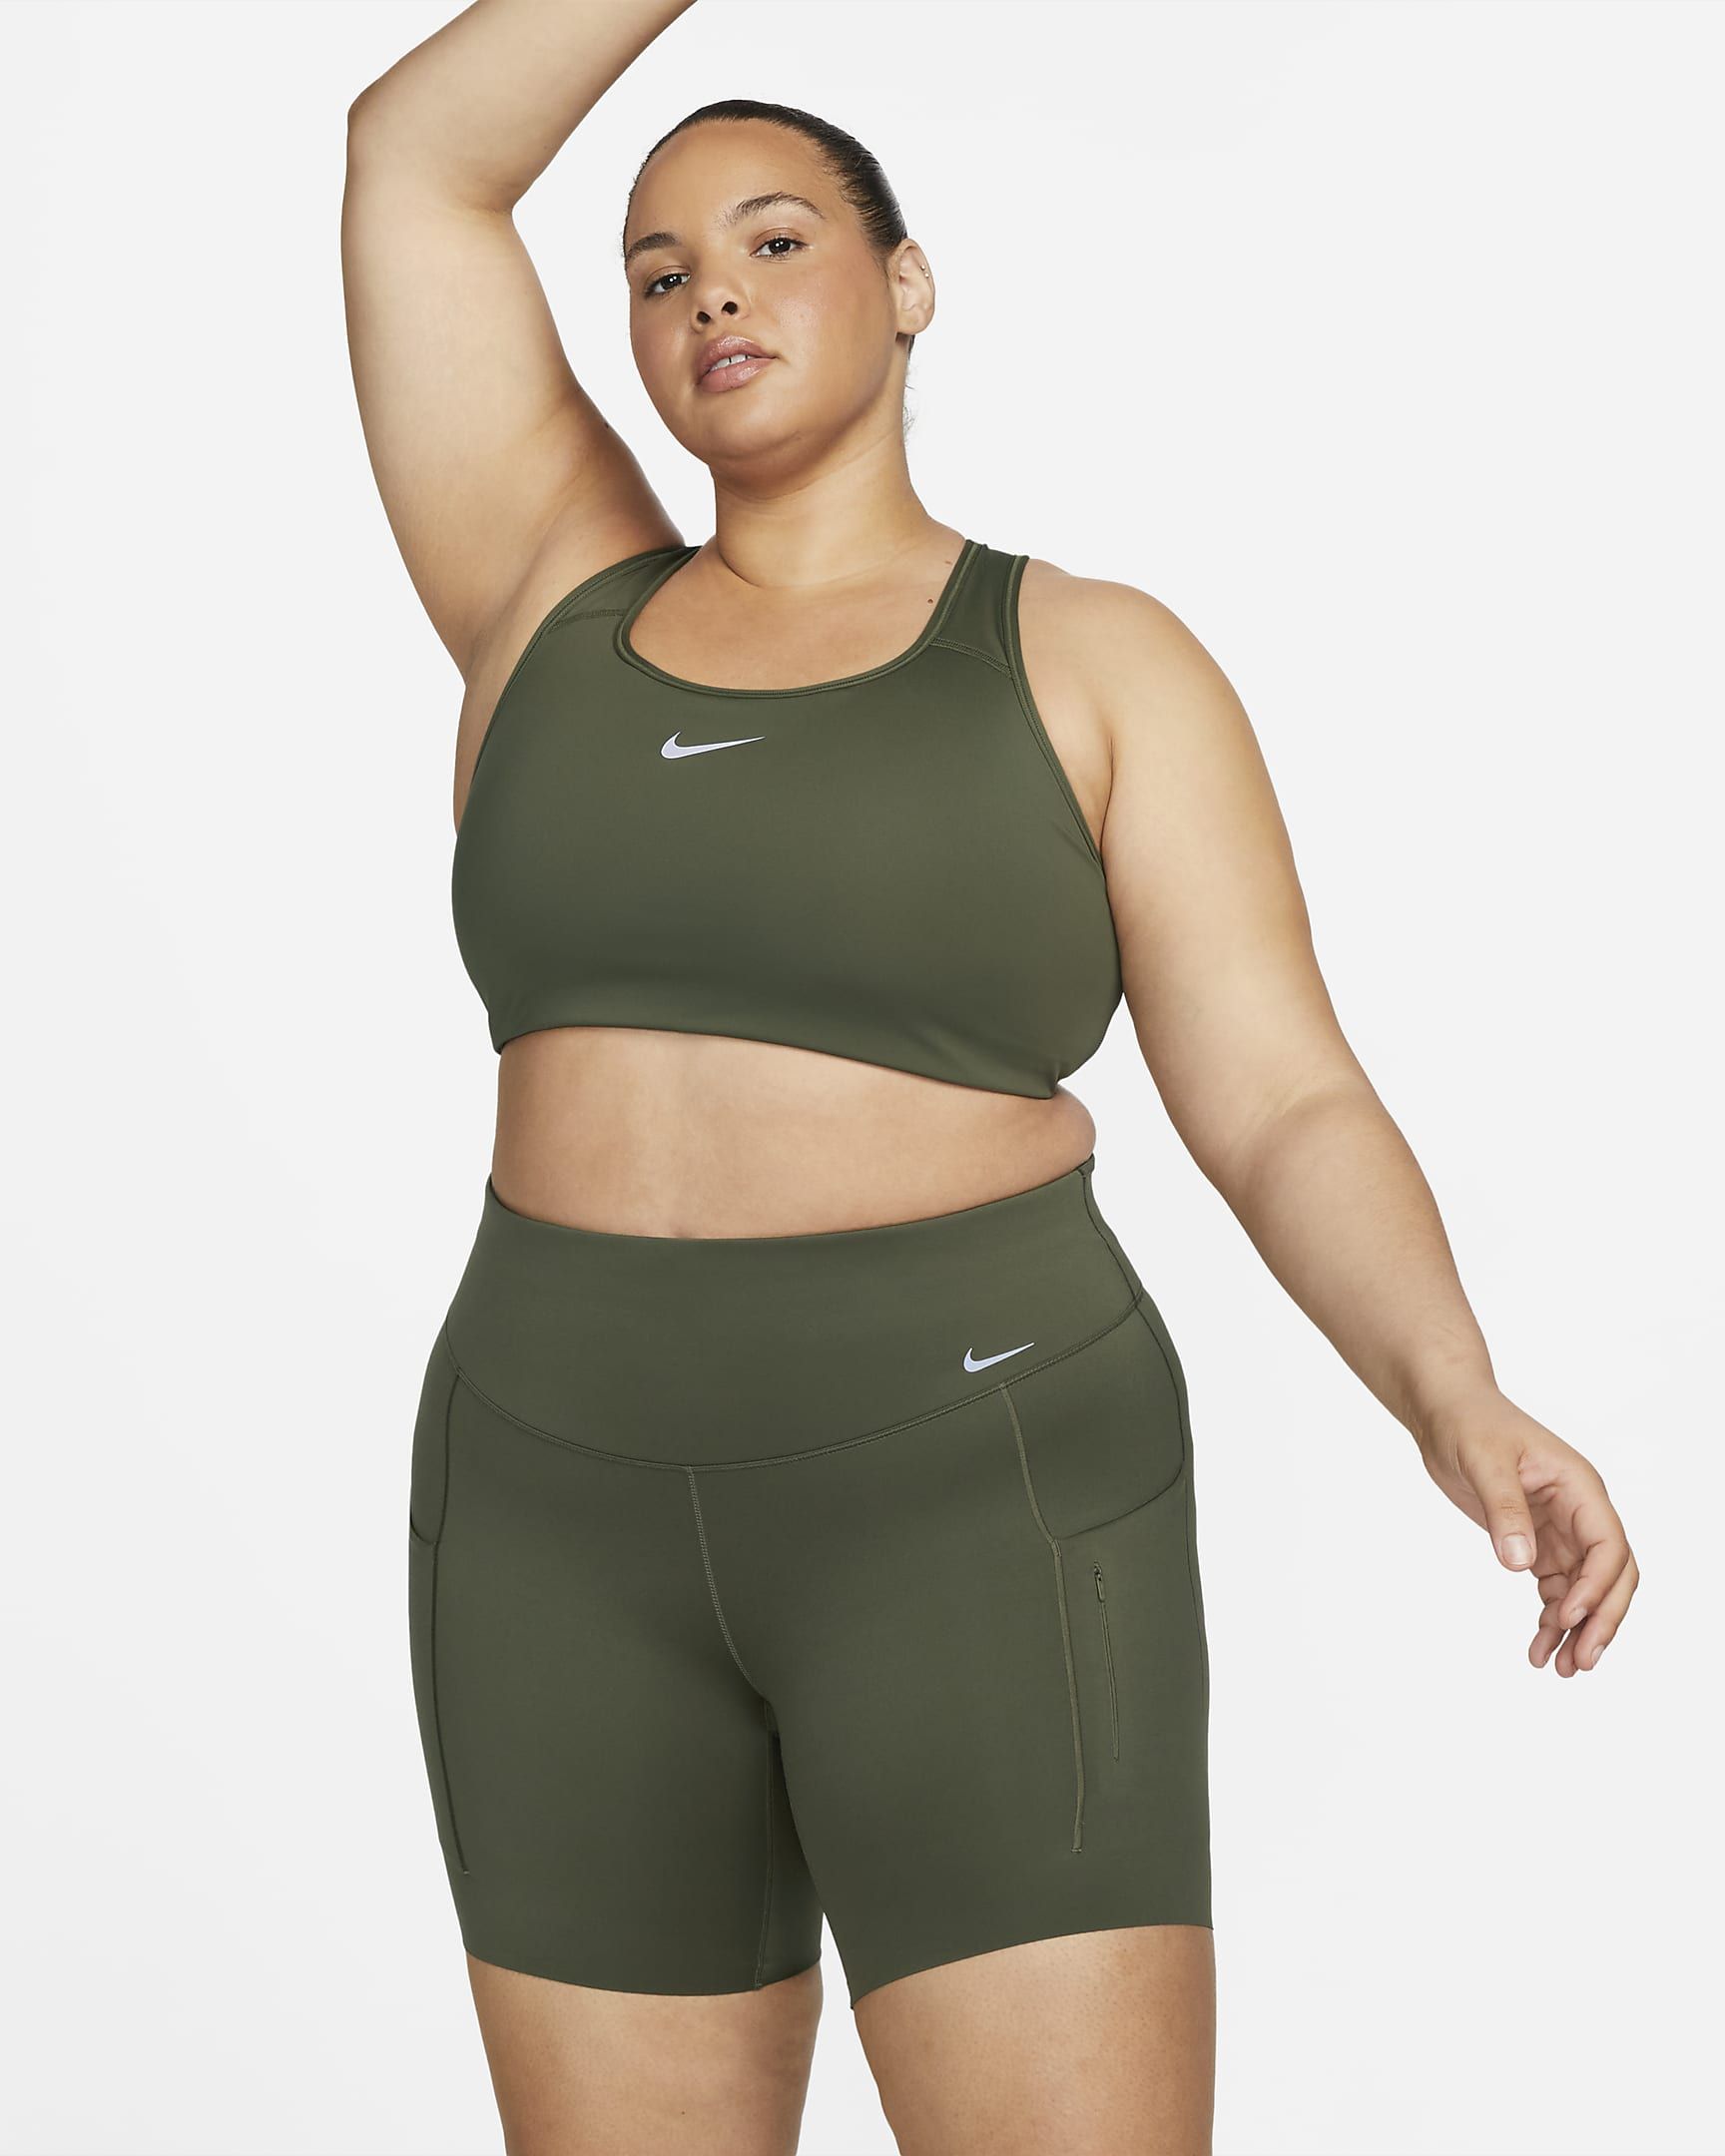 Nike Go Women's Firm-Support High-Waisted 8" Biker Shorts with Pockets (Plus Size). Nike.com | Nike (US)